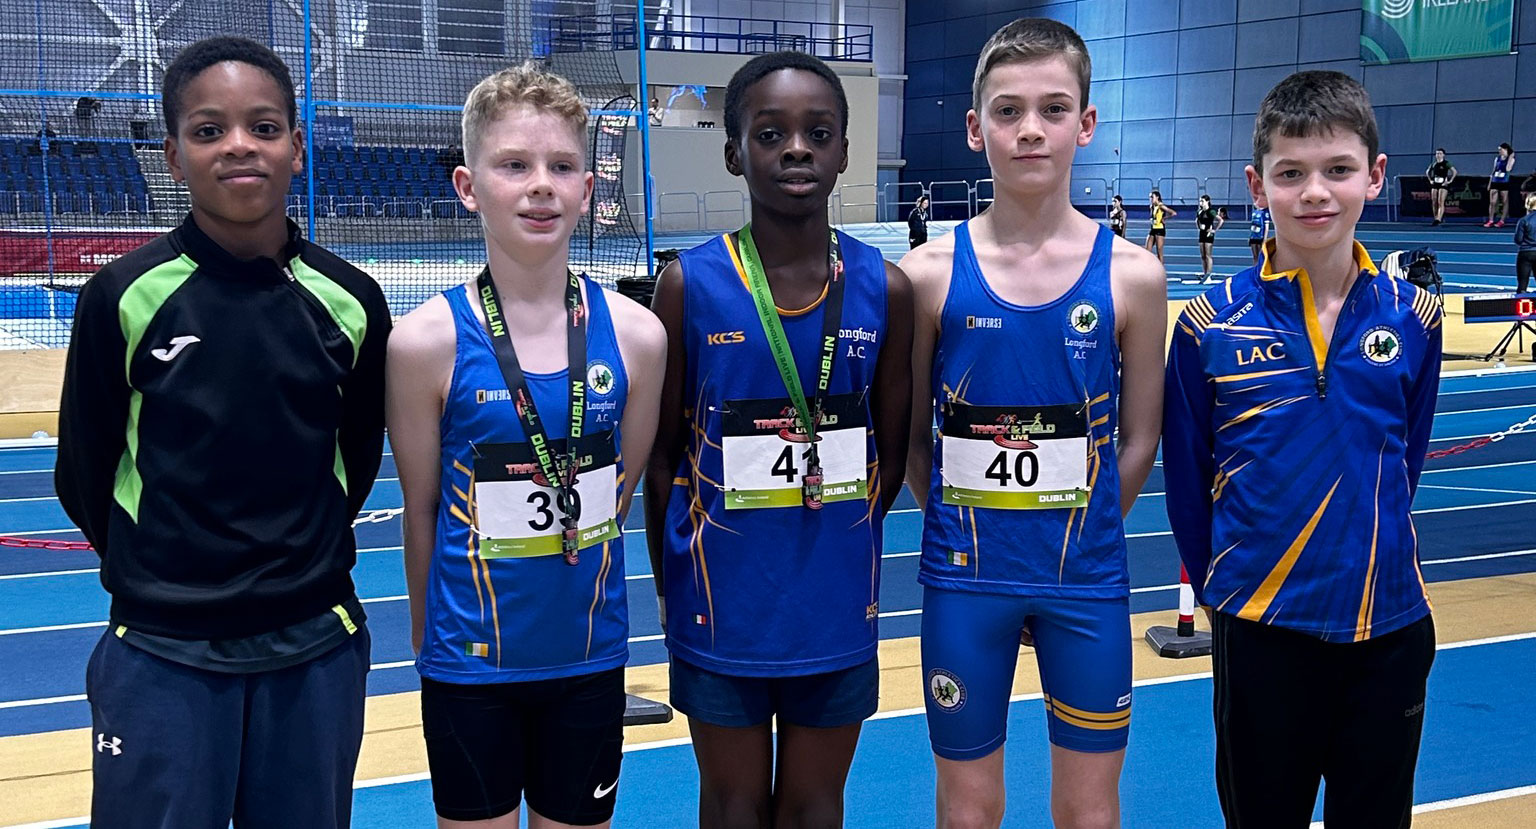 Report from Track & Field Live Dublin